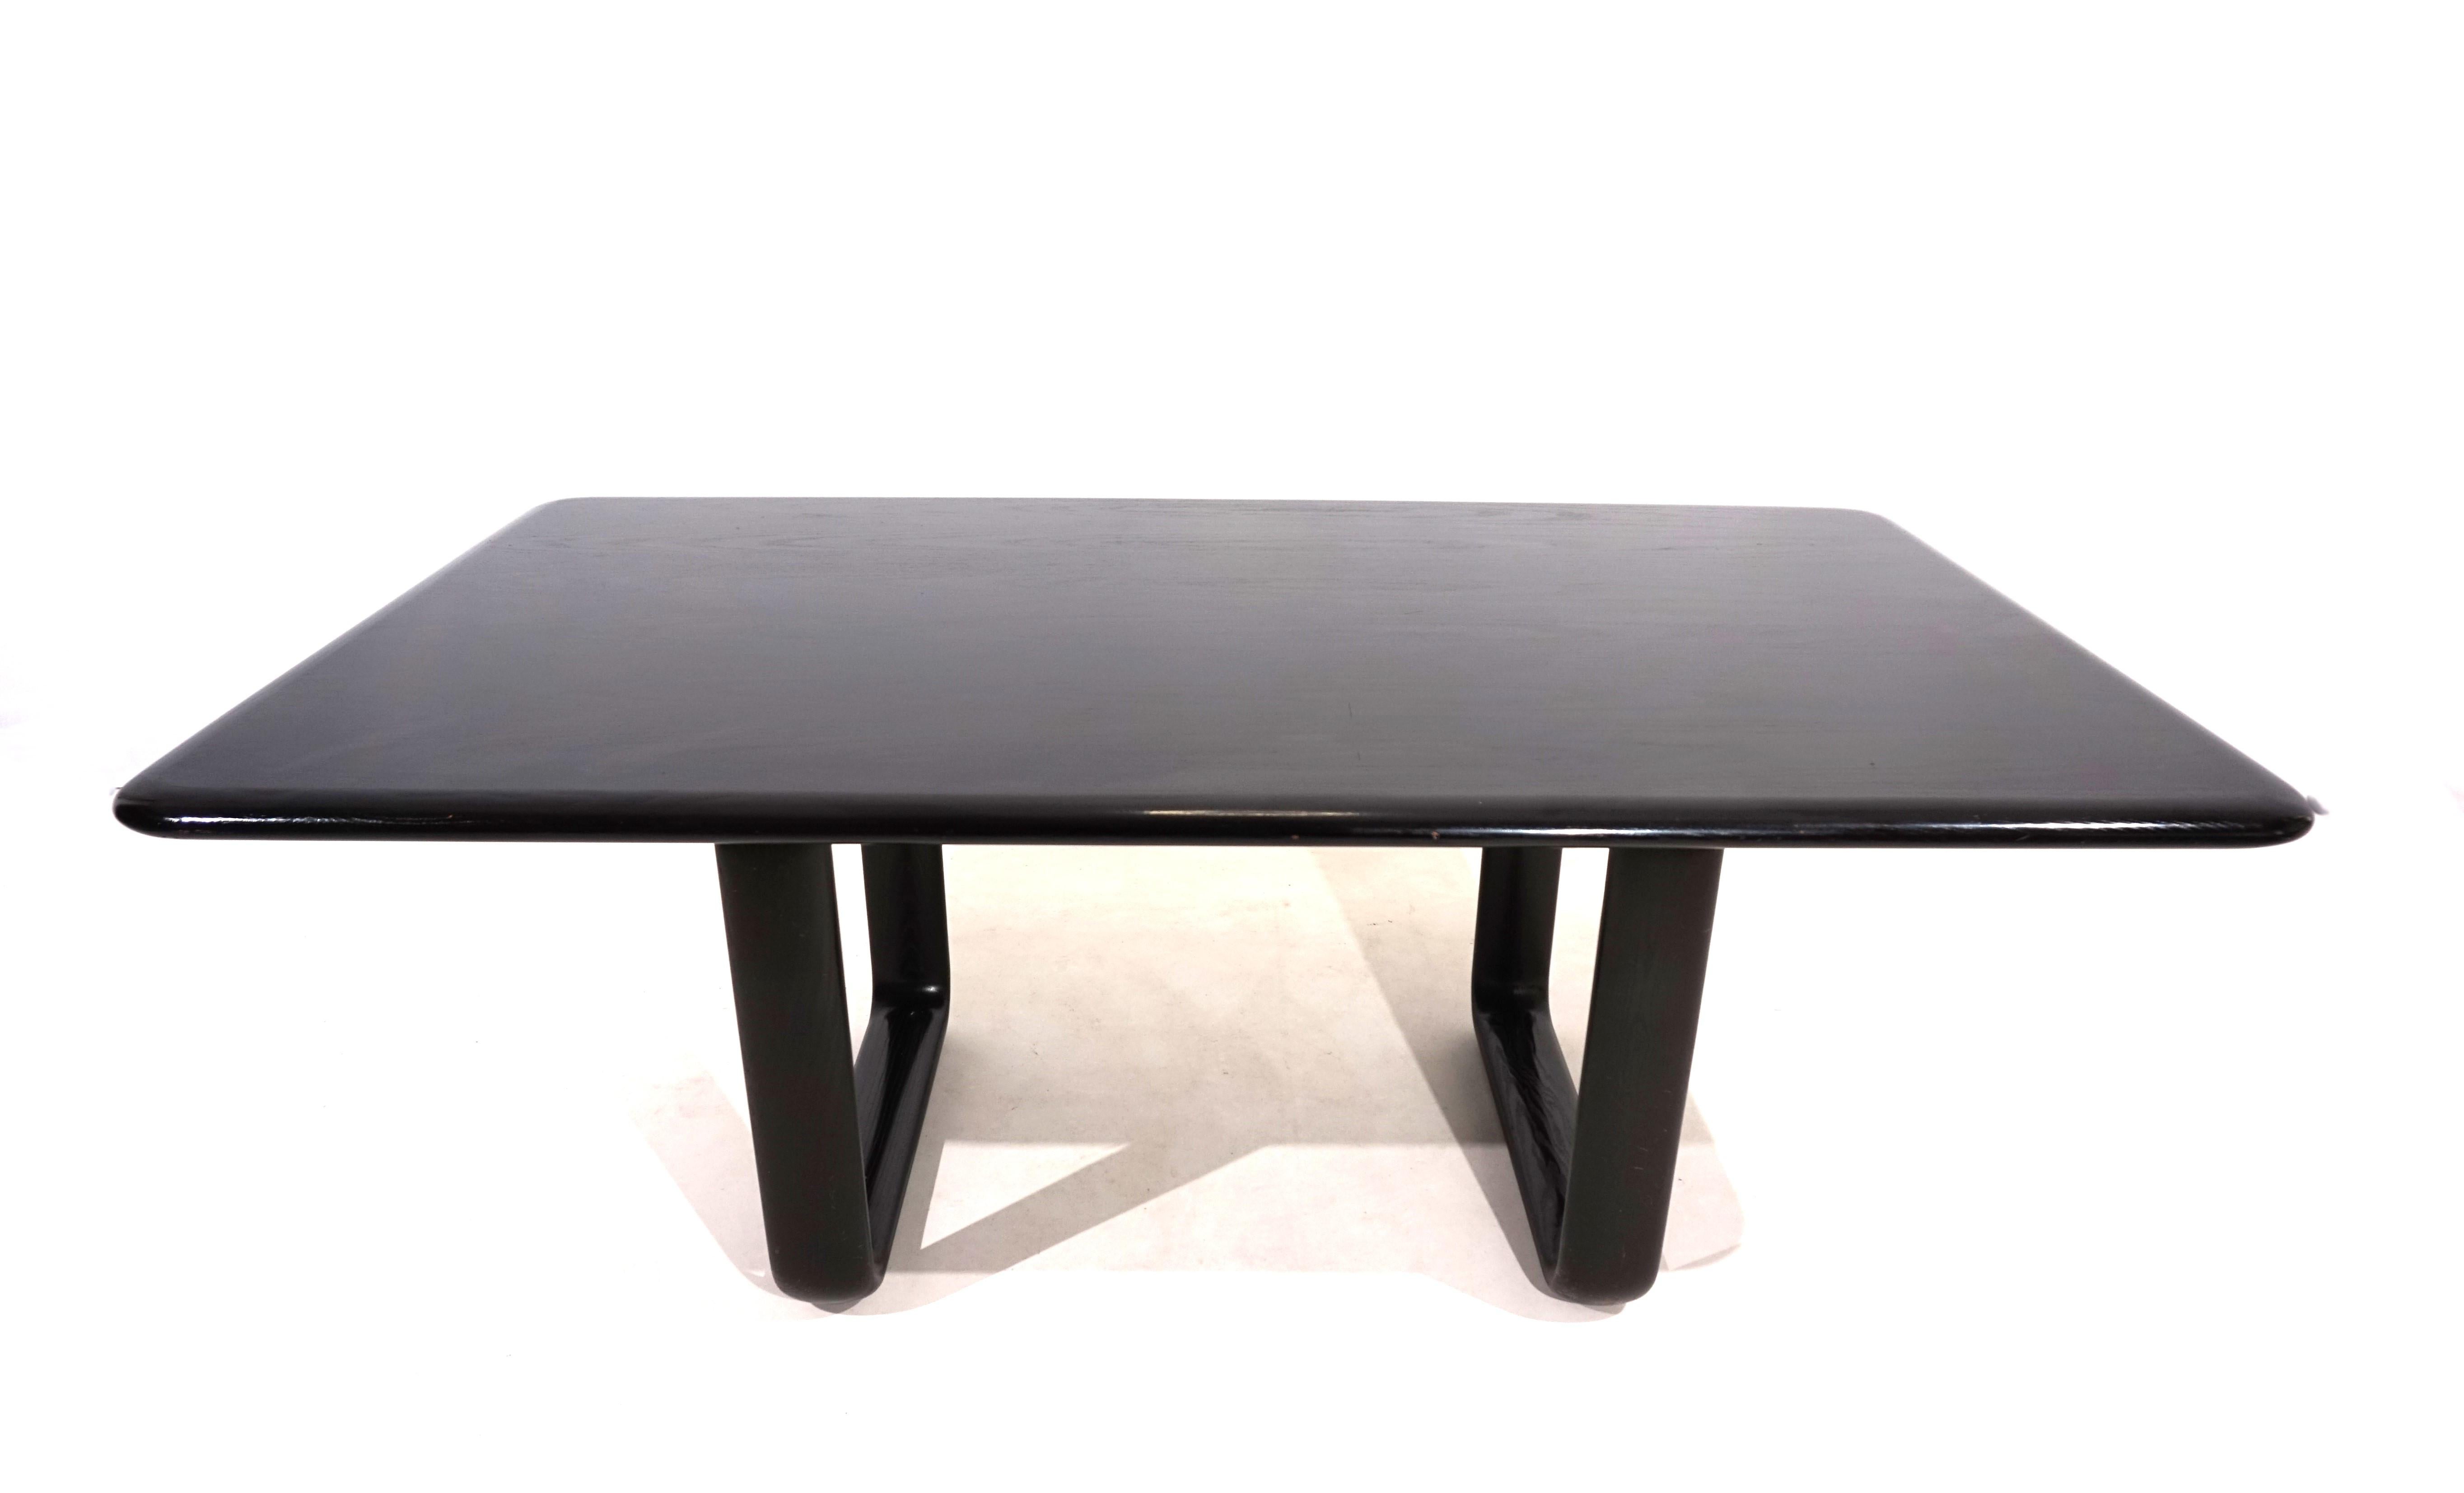 Solid black dining table from Rosenthal in very good condition. The solid wooden table top rests on the cubic wooden arches typical of Hombre and the recessed arrangement of the frame allows for excellent seating at the entire table. The dining